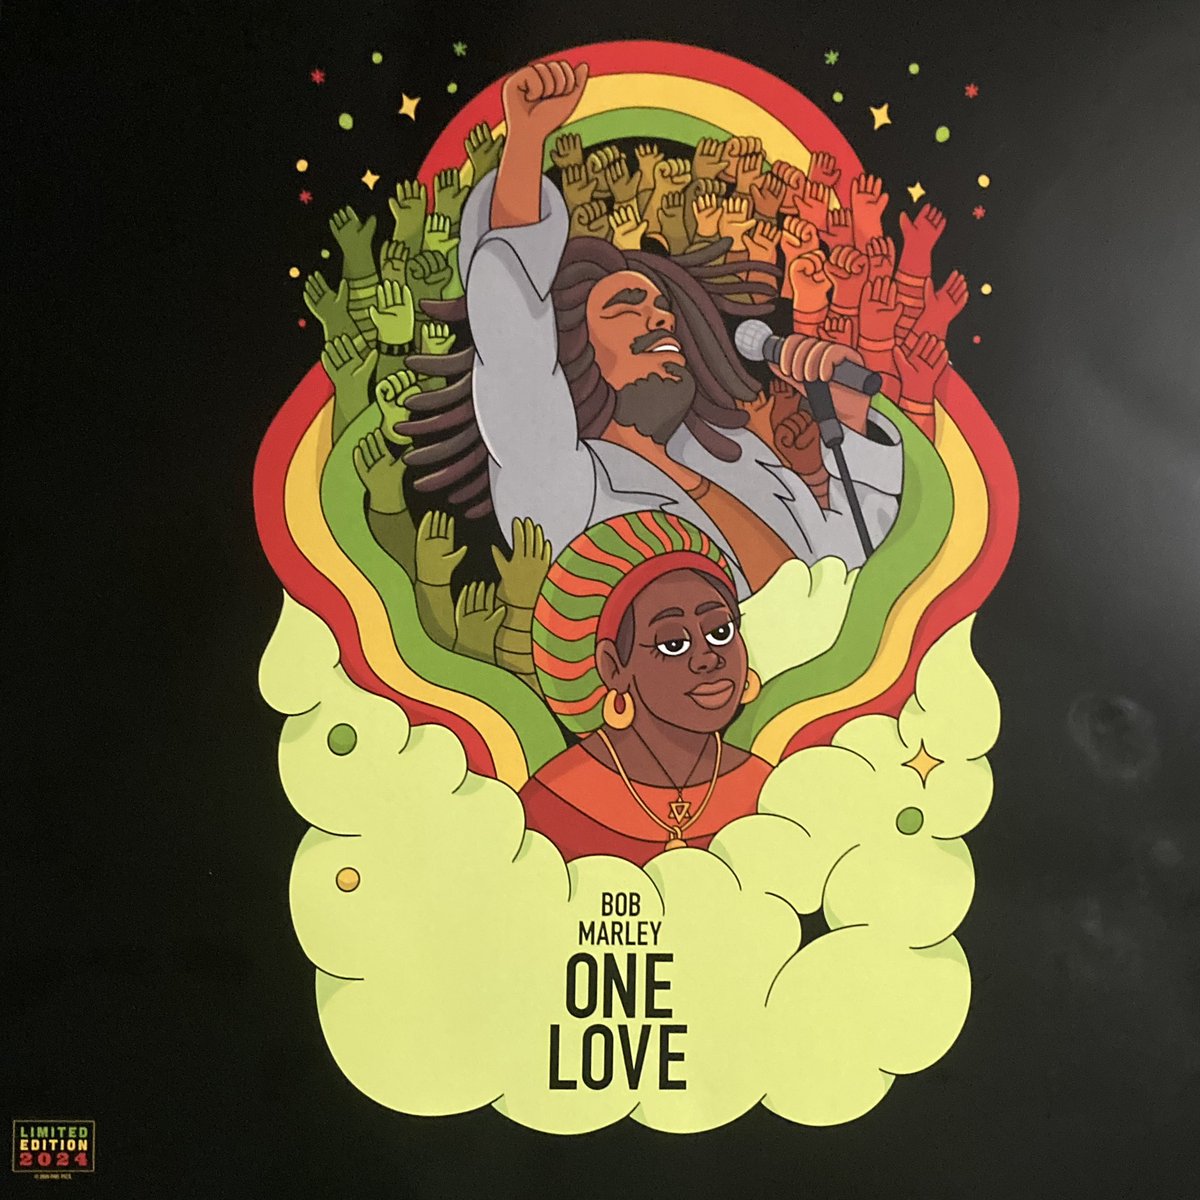 Been waiting for this for over 30 years. Well worth the wait. @OneLoveMovie